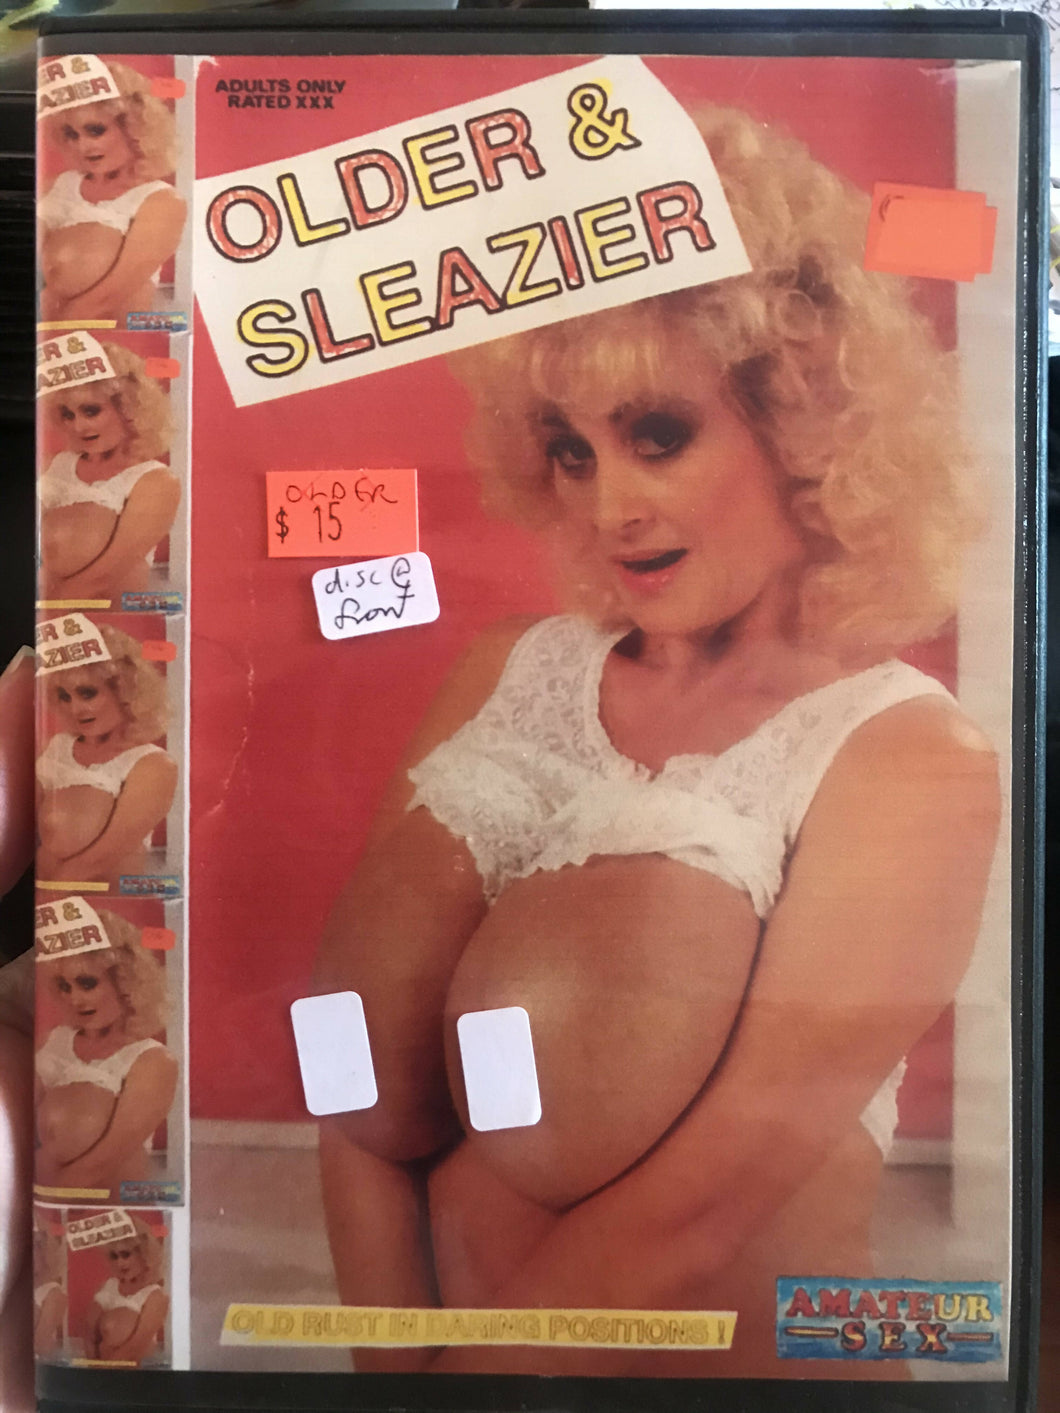 OLDER and SLEAZIER DVDR bootleg milf sov mature photo picture